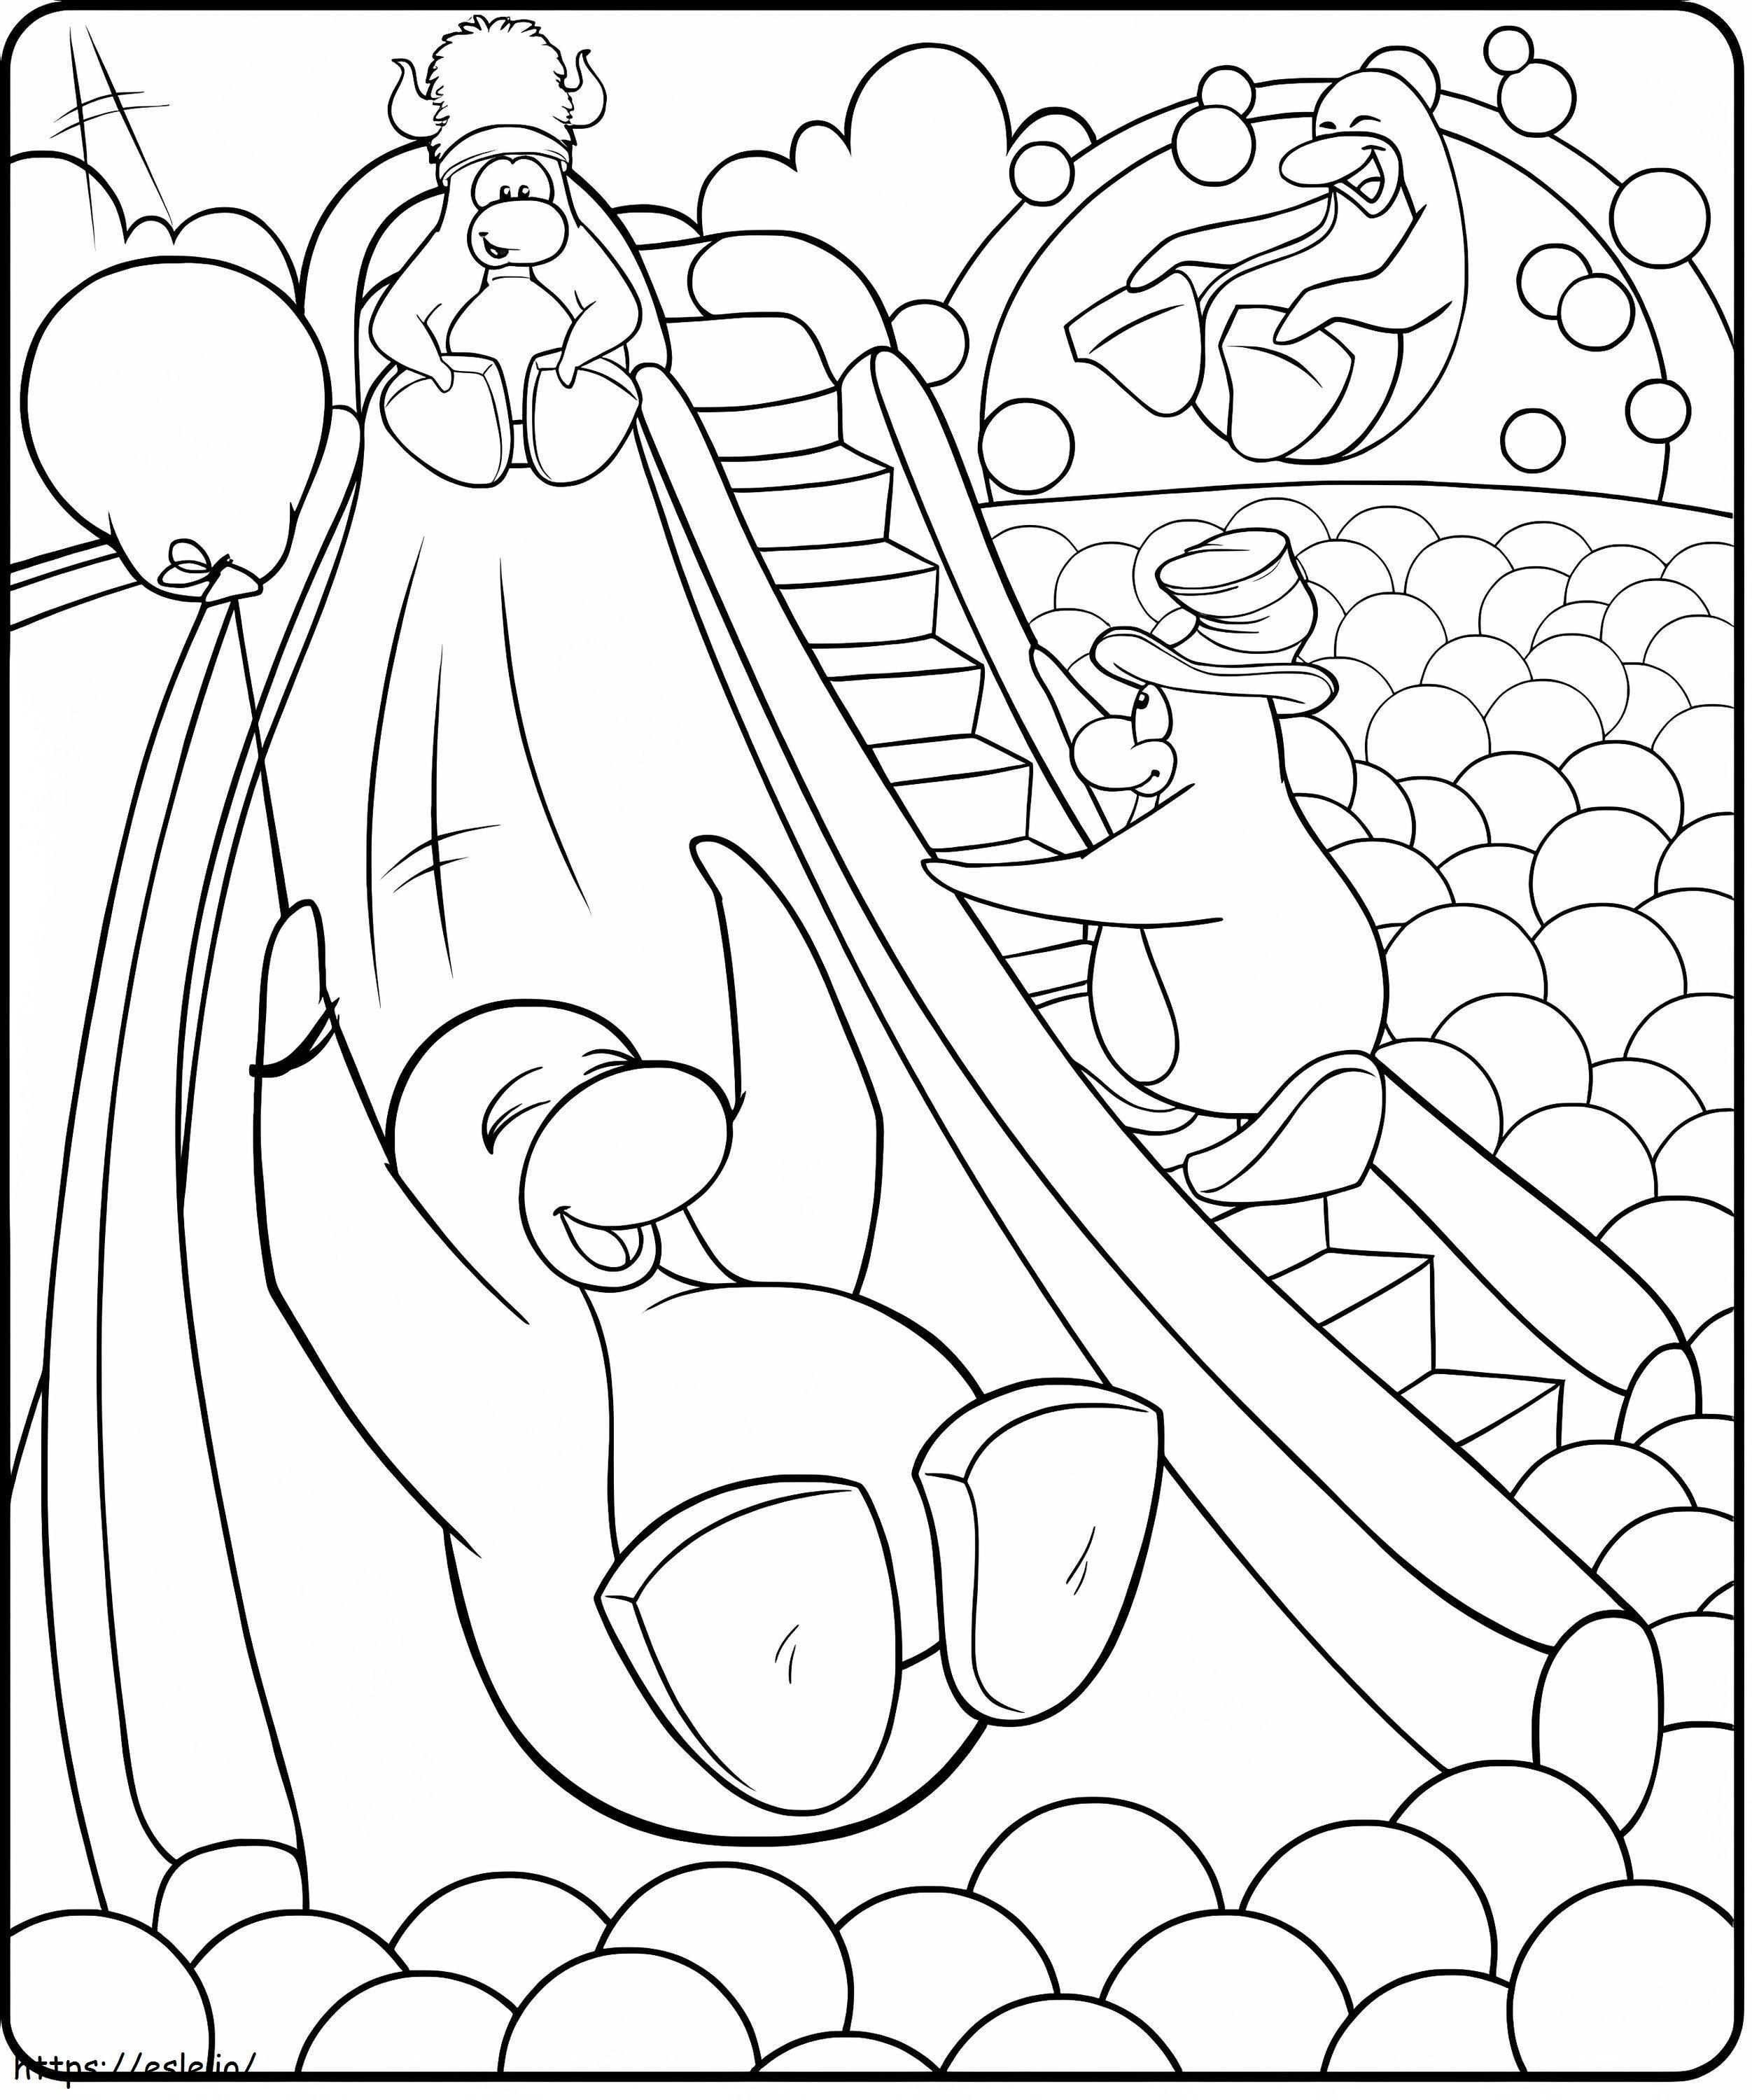 Club Penguin For Kid coloring page